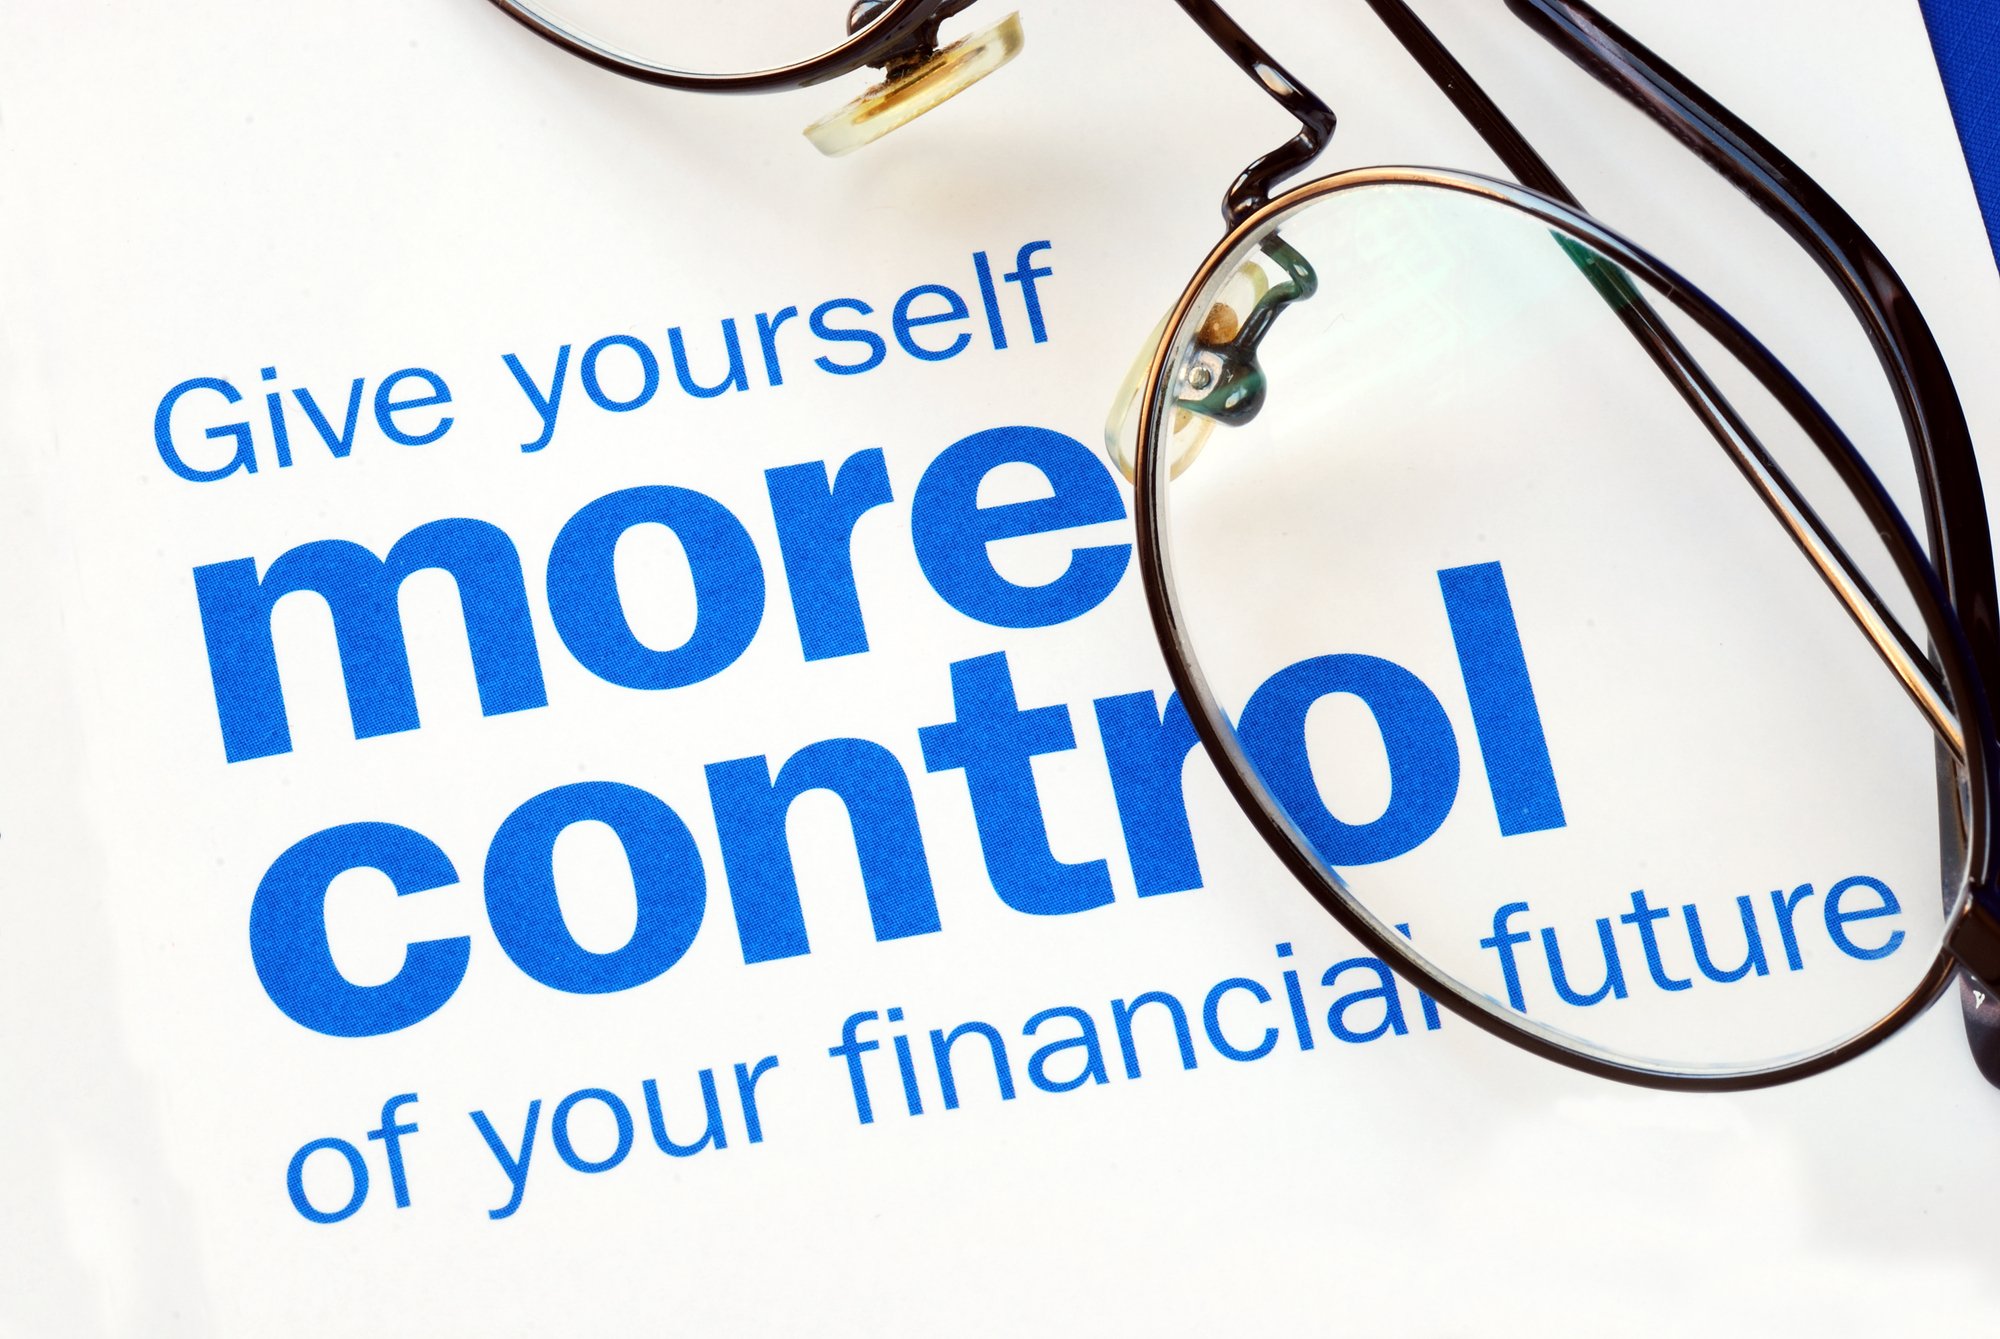 Take control of your financial future